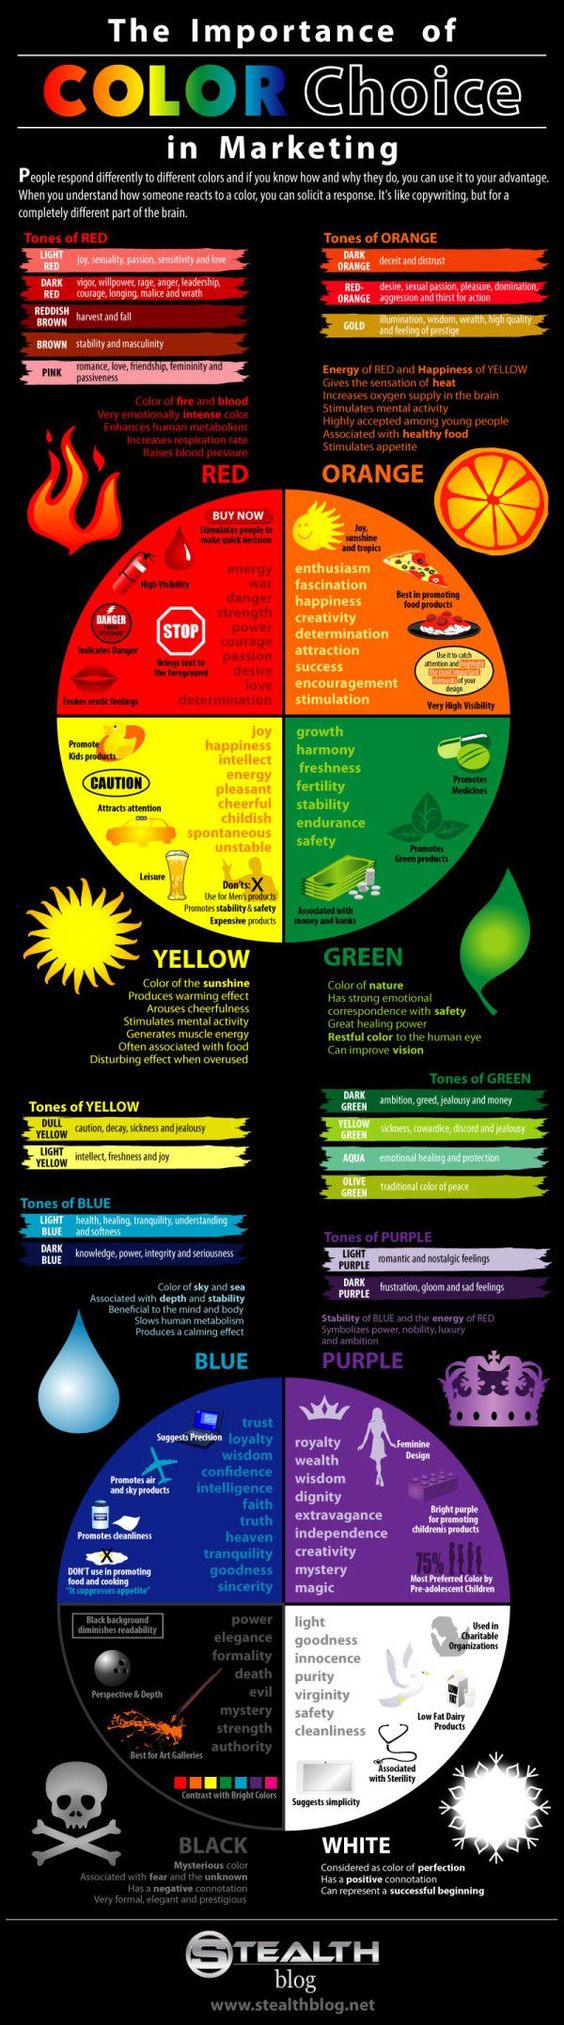 The importance of Color Choice in Marketing - An Infographic